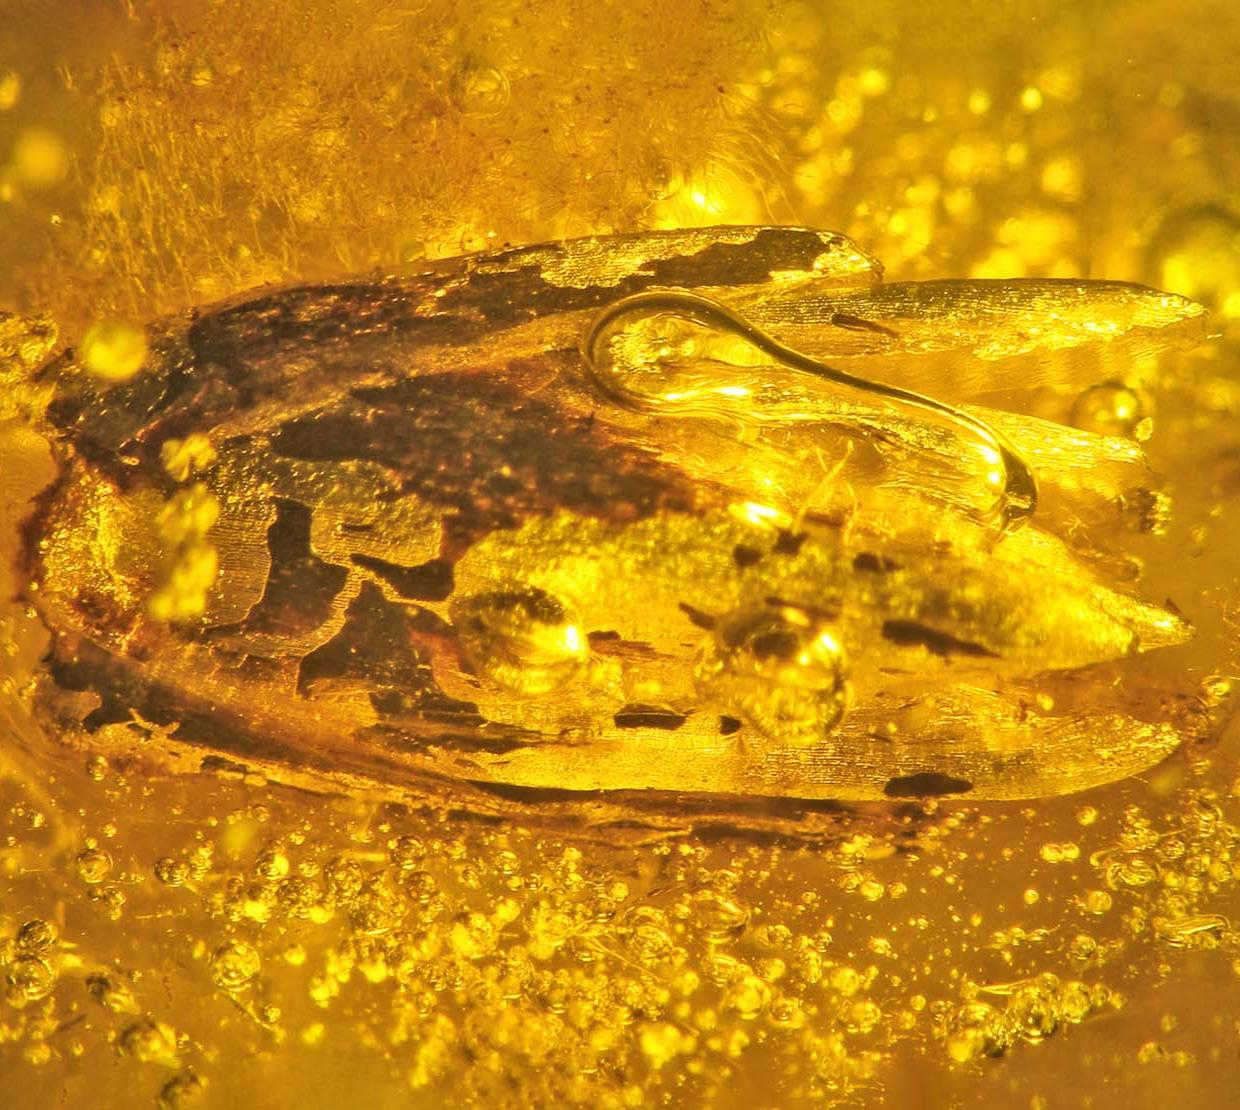 Eograminis balticus in yellow amber.